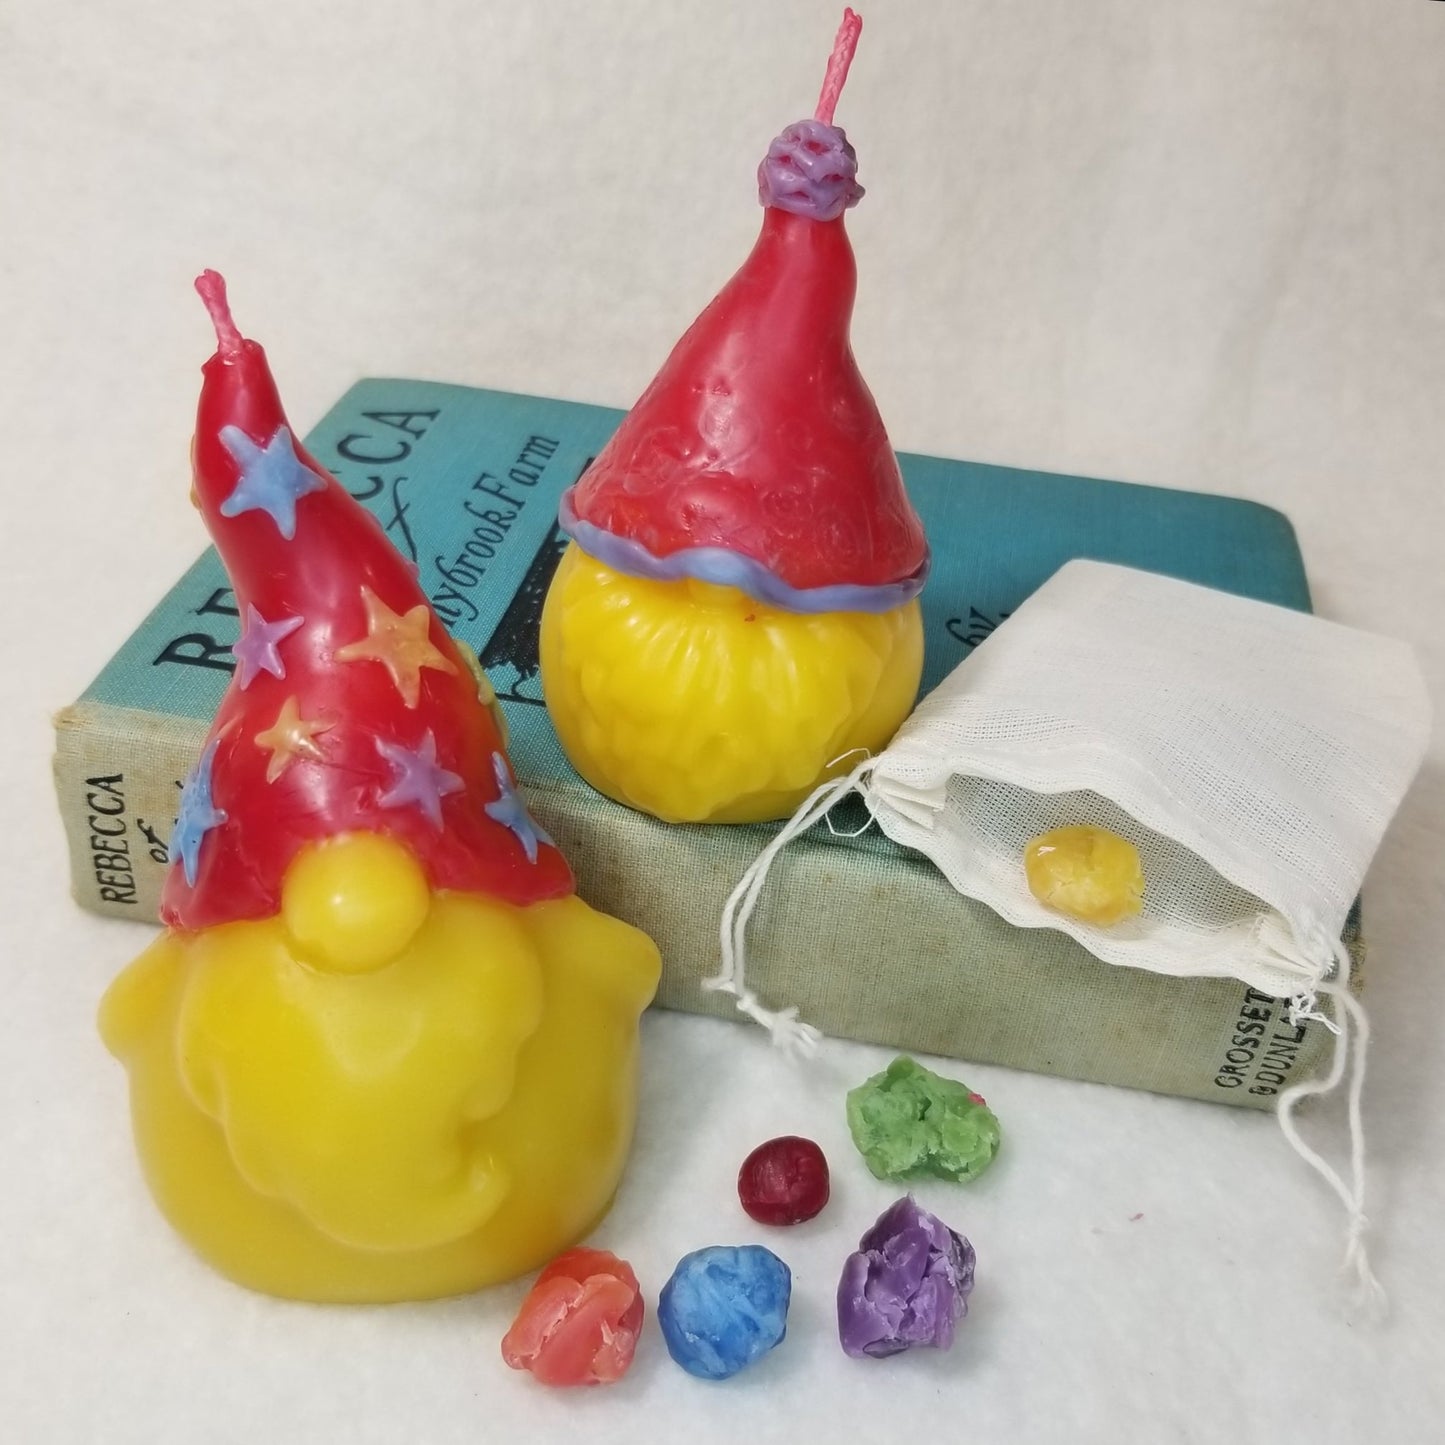 DIY gnome decorating kit - image shows decorated gnome candles and bag of wax that comes in the DIY kit